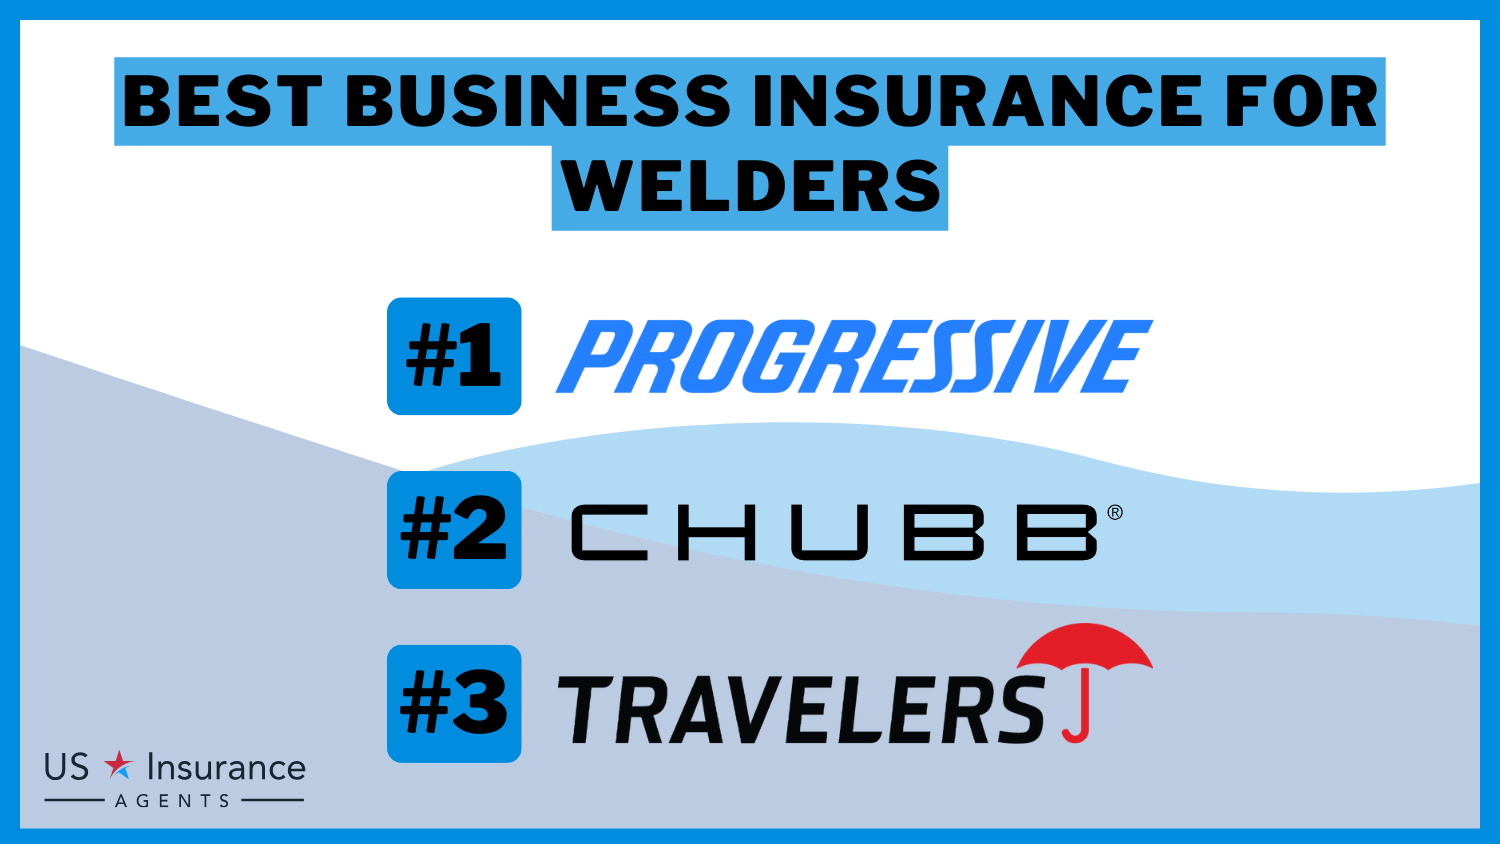 3 Best Business Insurance for Welders: Progressive, Chubb, and Travelers